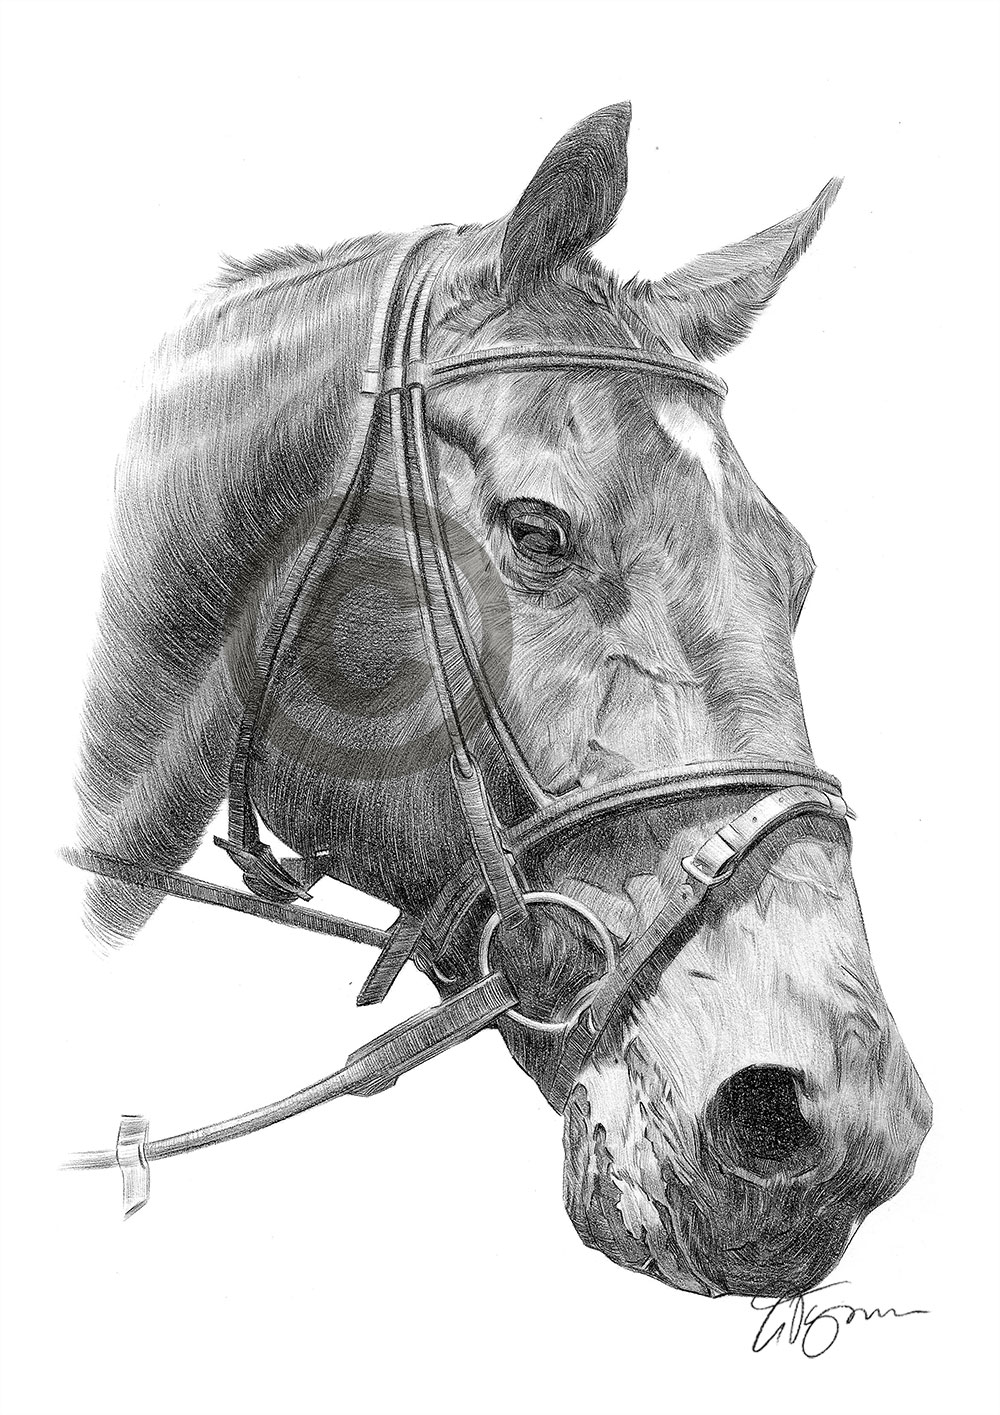 Pencil drawing of a brown horse by artist Gary Tymon